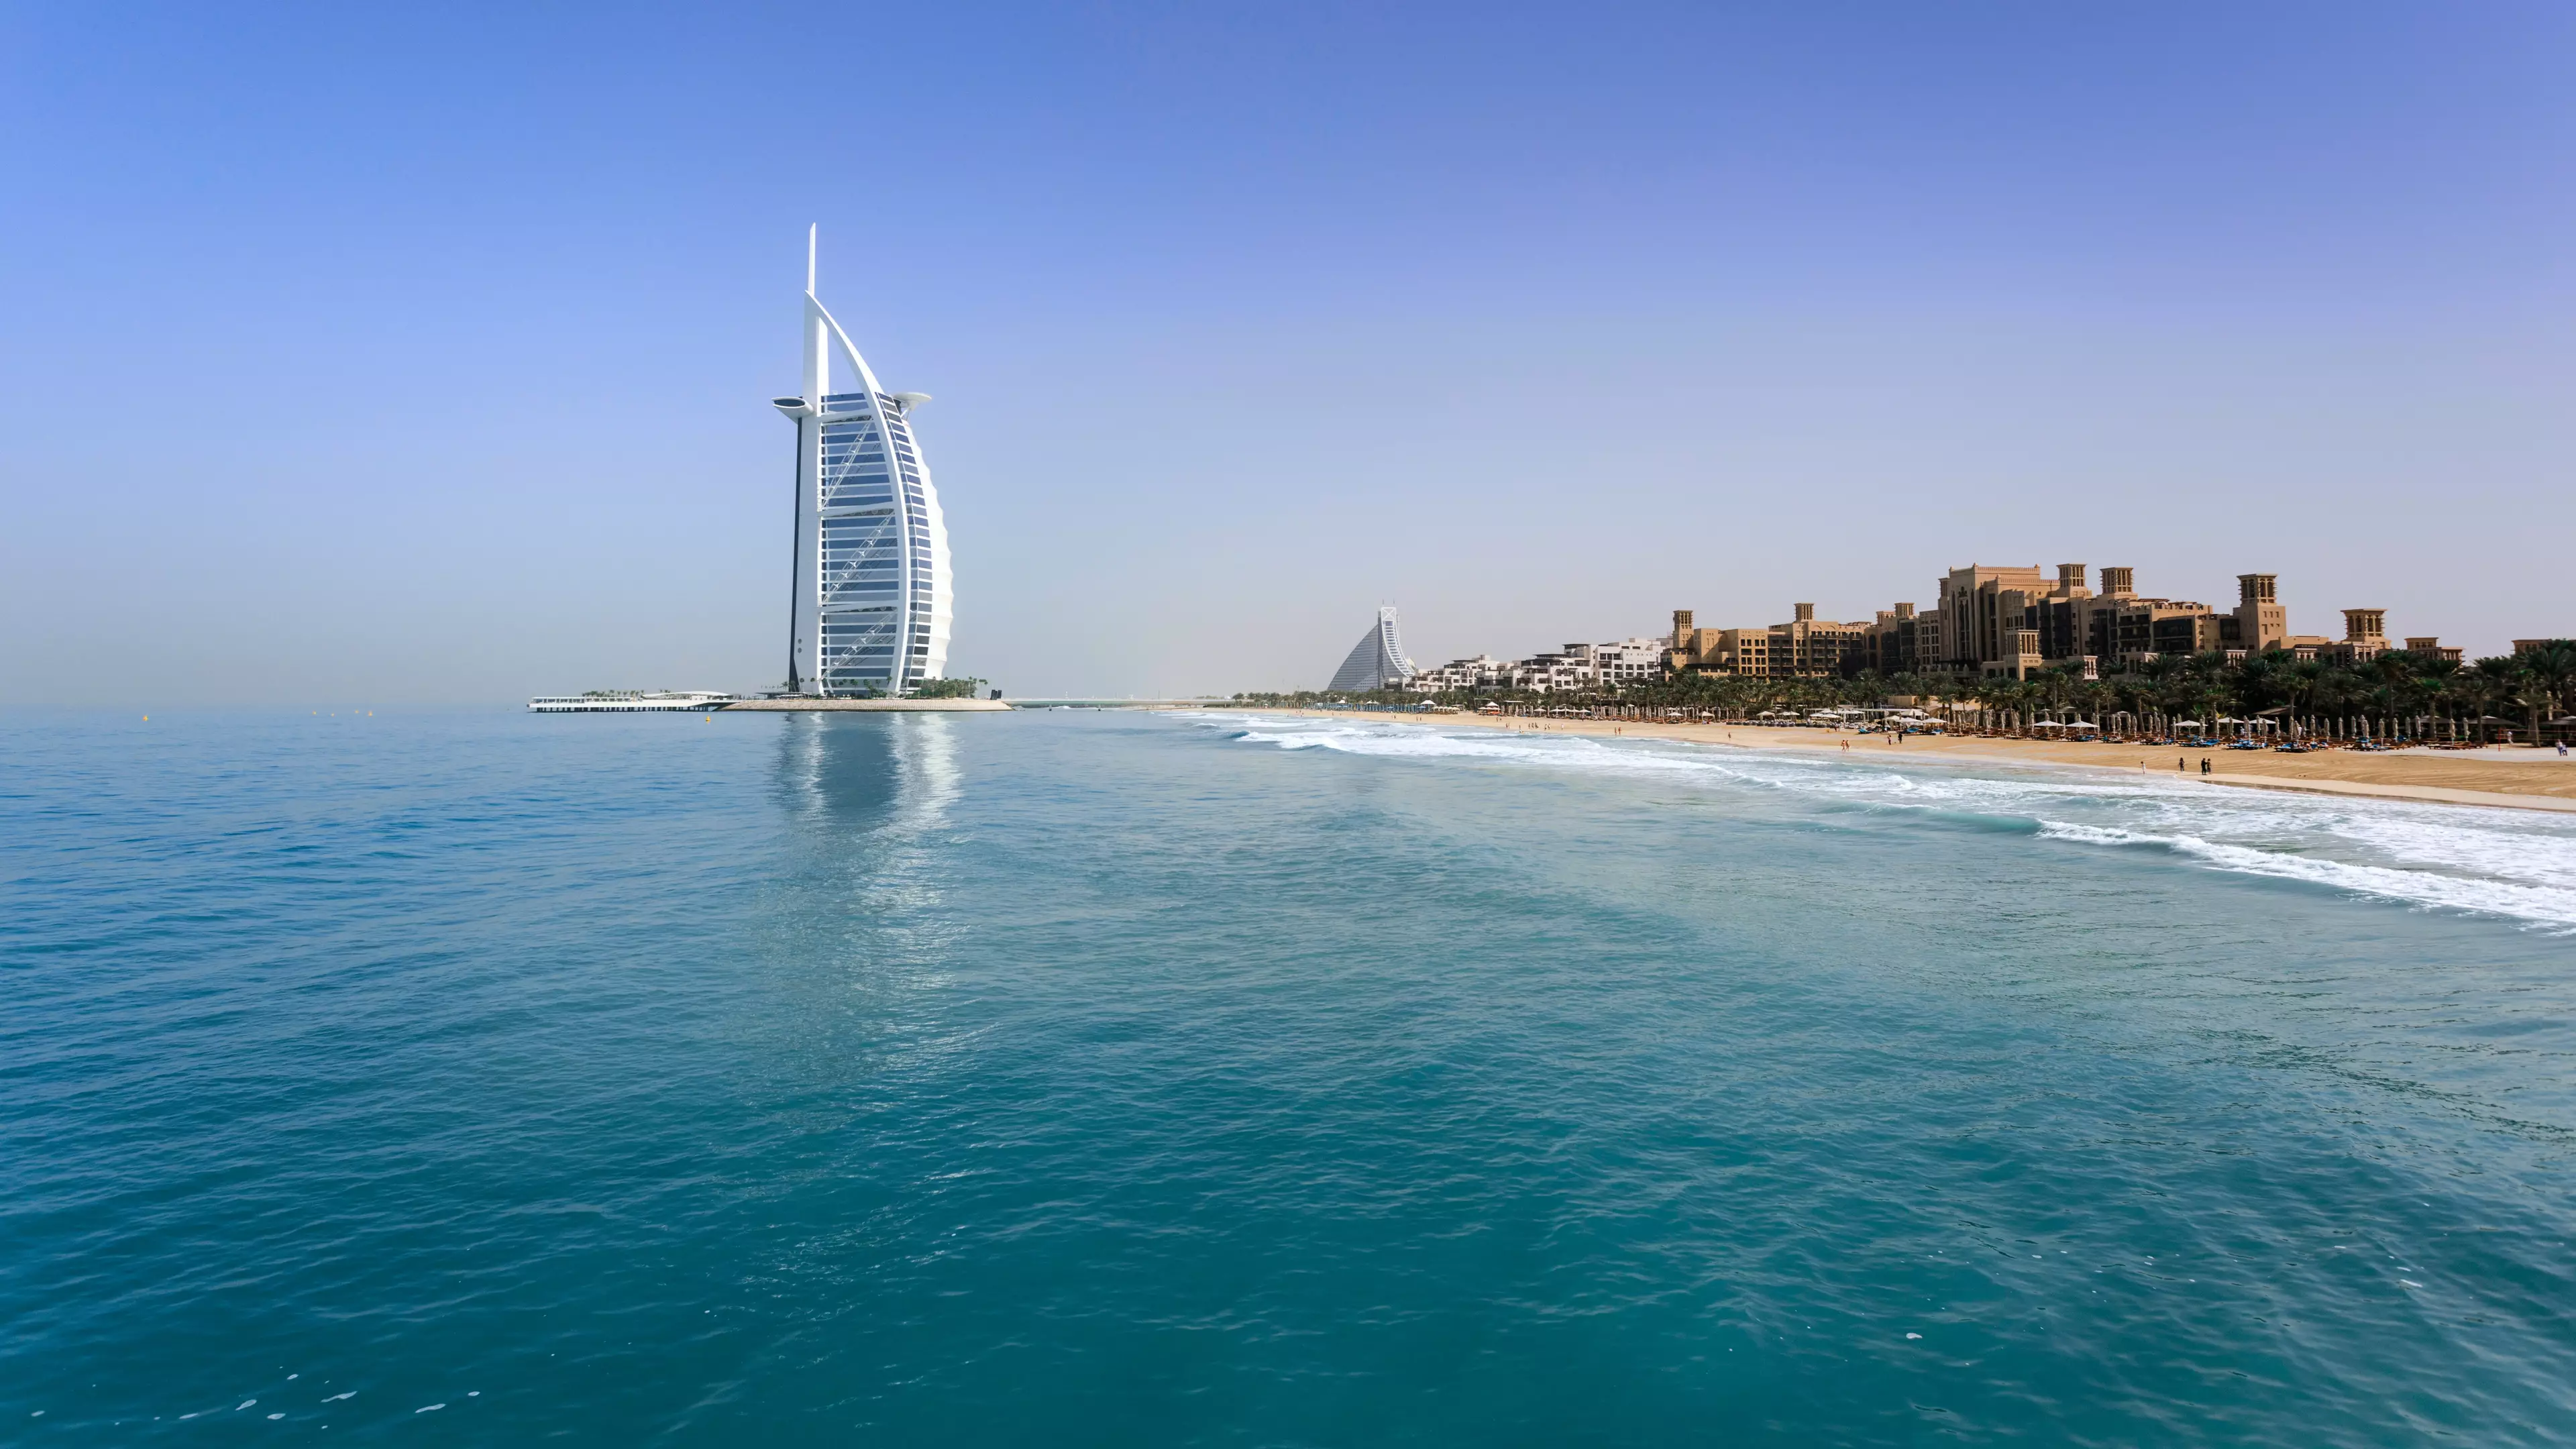 Influencers Urged By Travel Company To Not Share 'Insensitive' Photos From Dubai